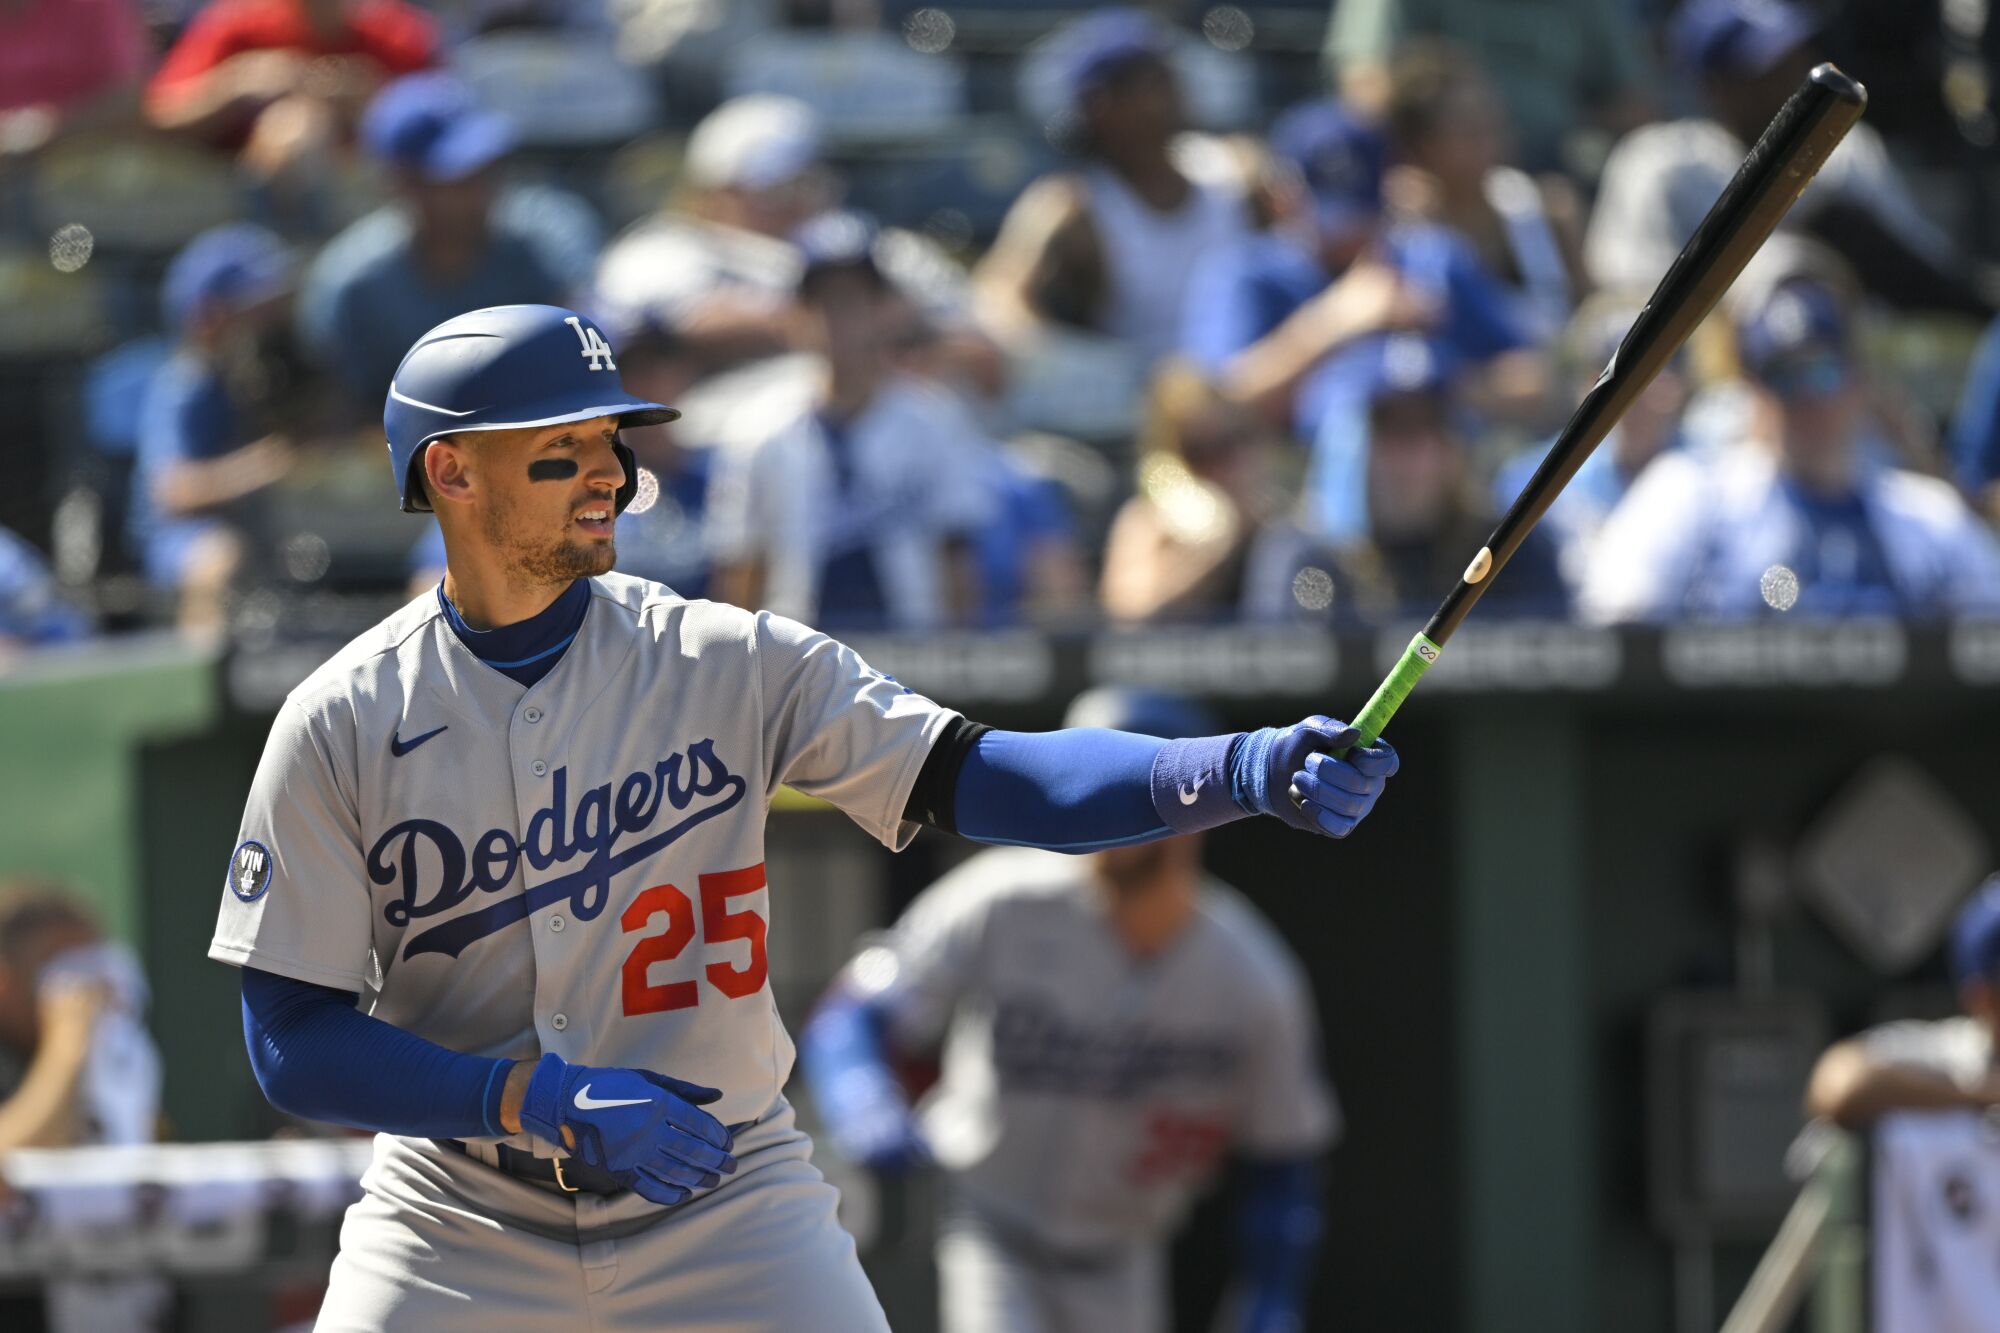 Dodgers' Trayce Thompson stands at bat against the Kansas City Royals